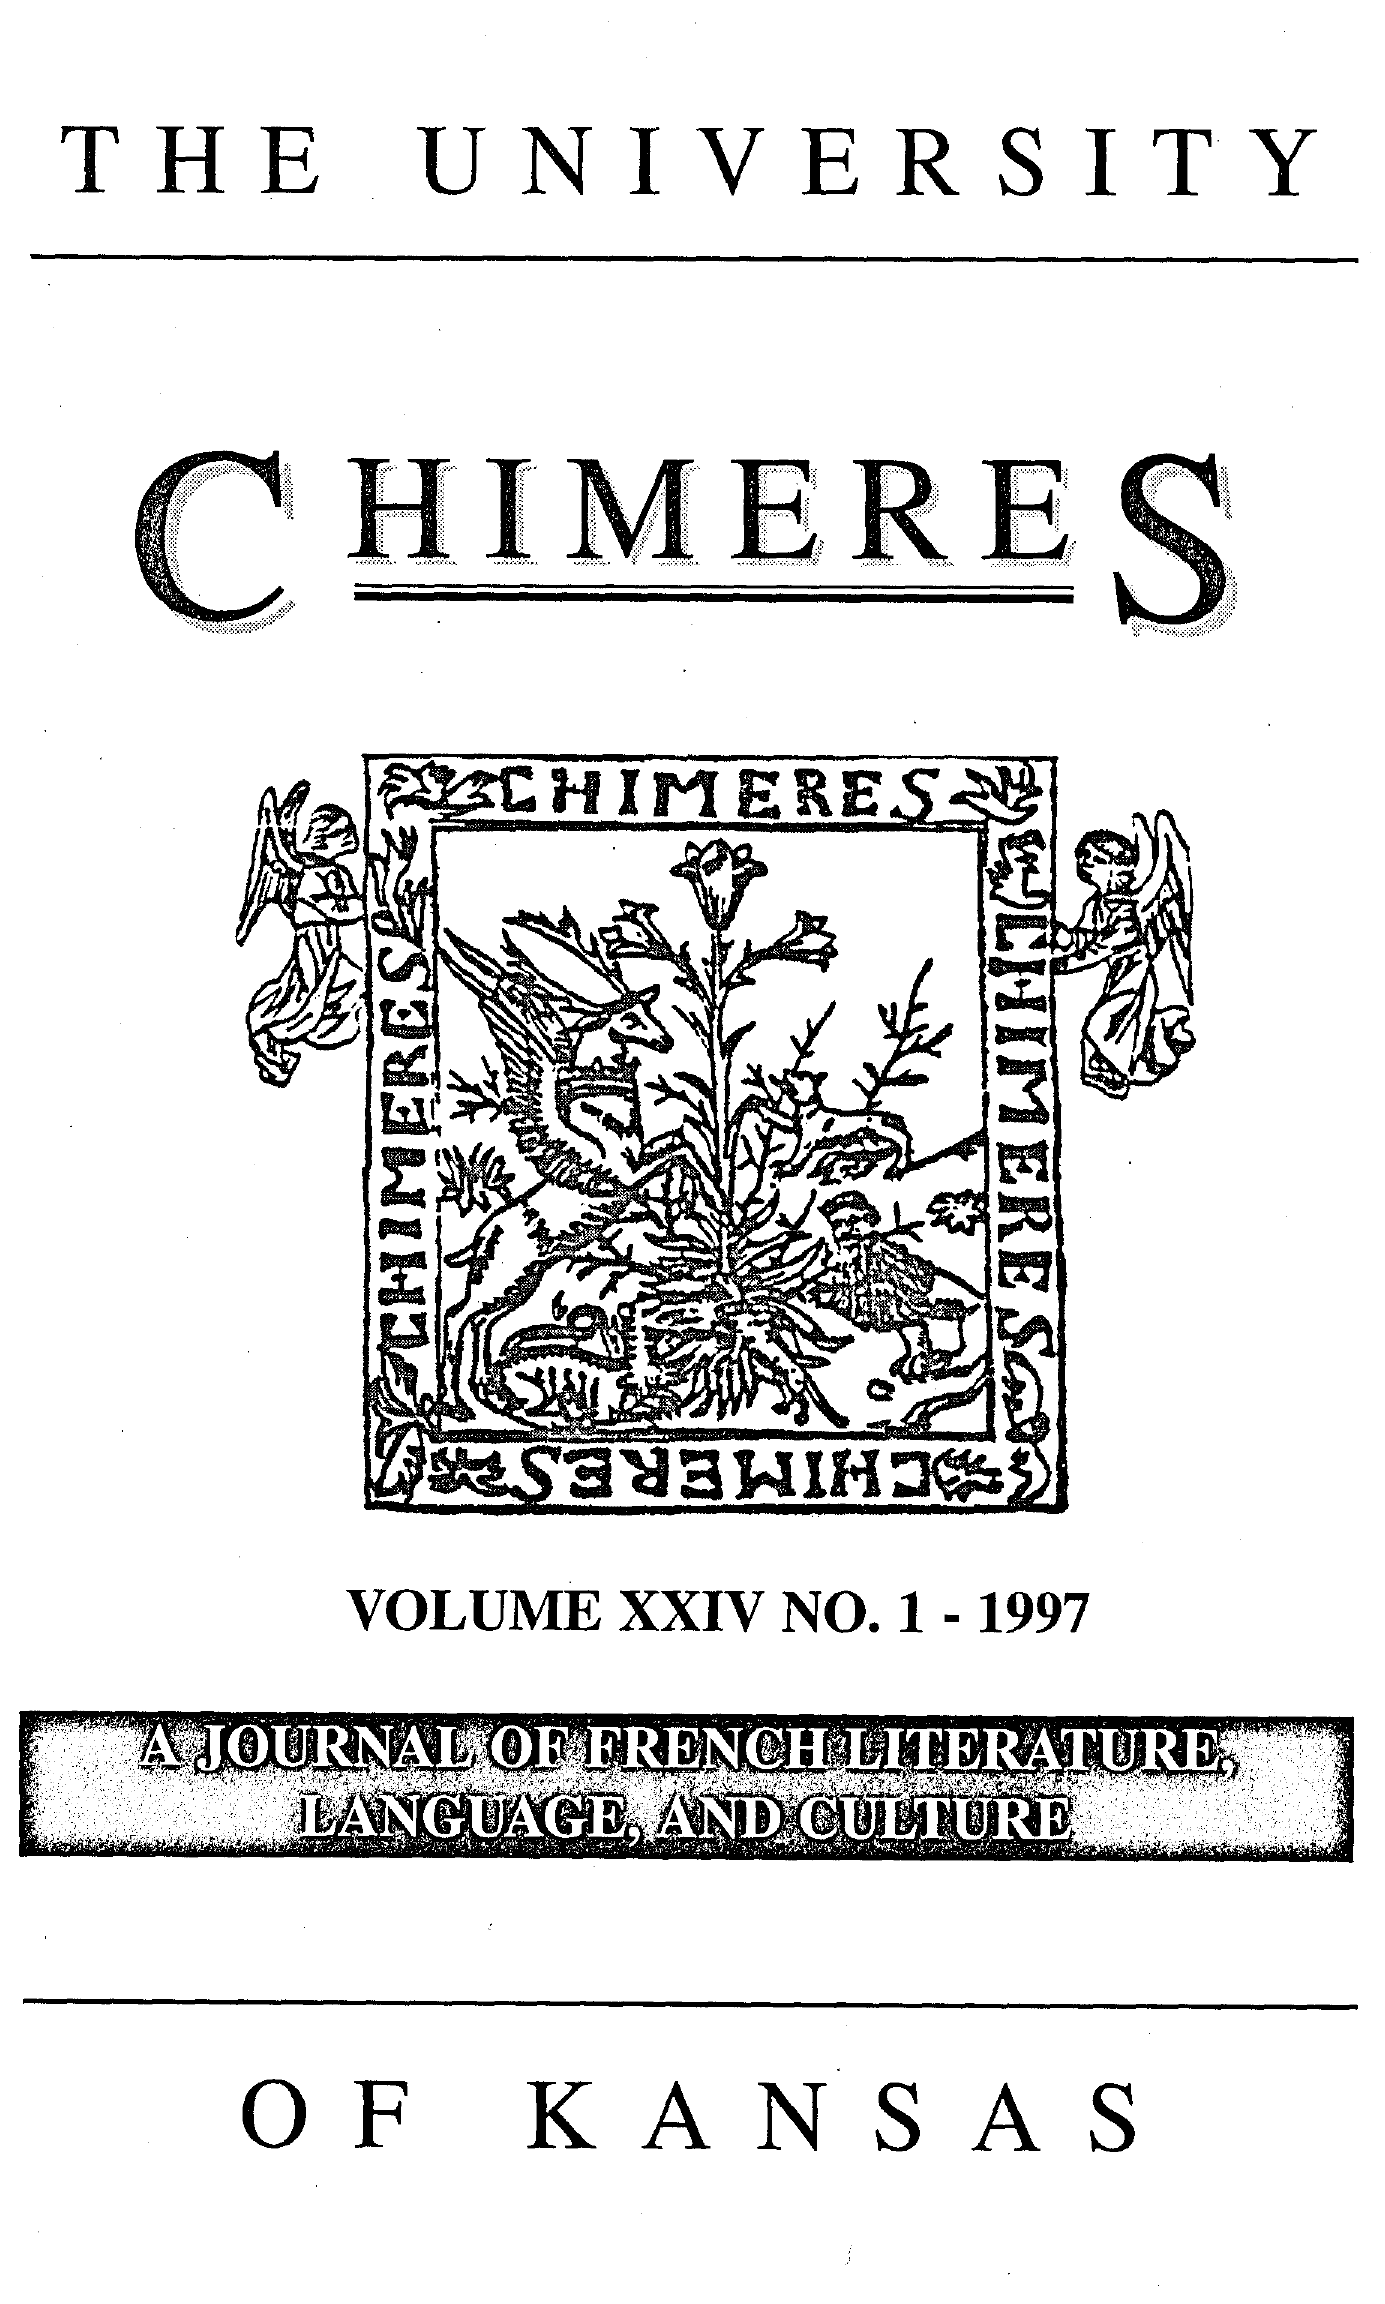 Cover for Chimères, Vol. 24.1, 1997